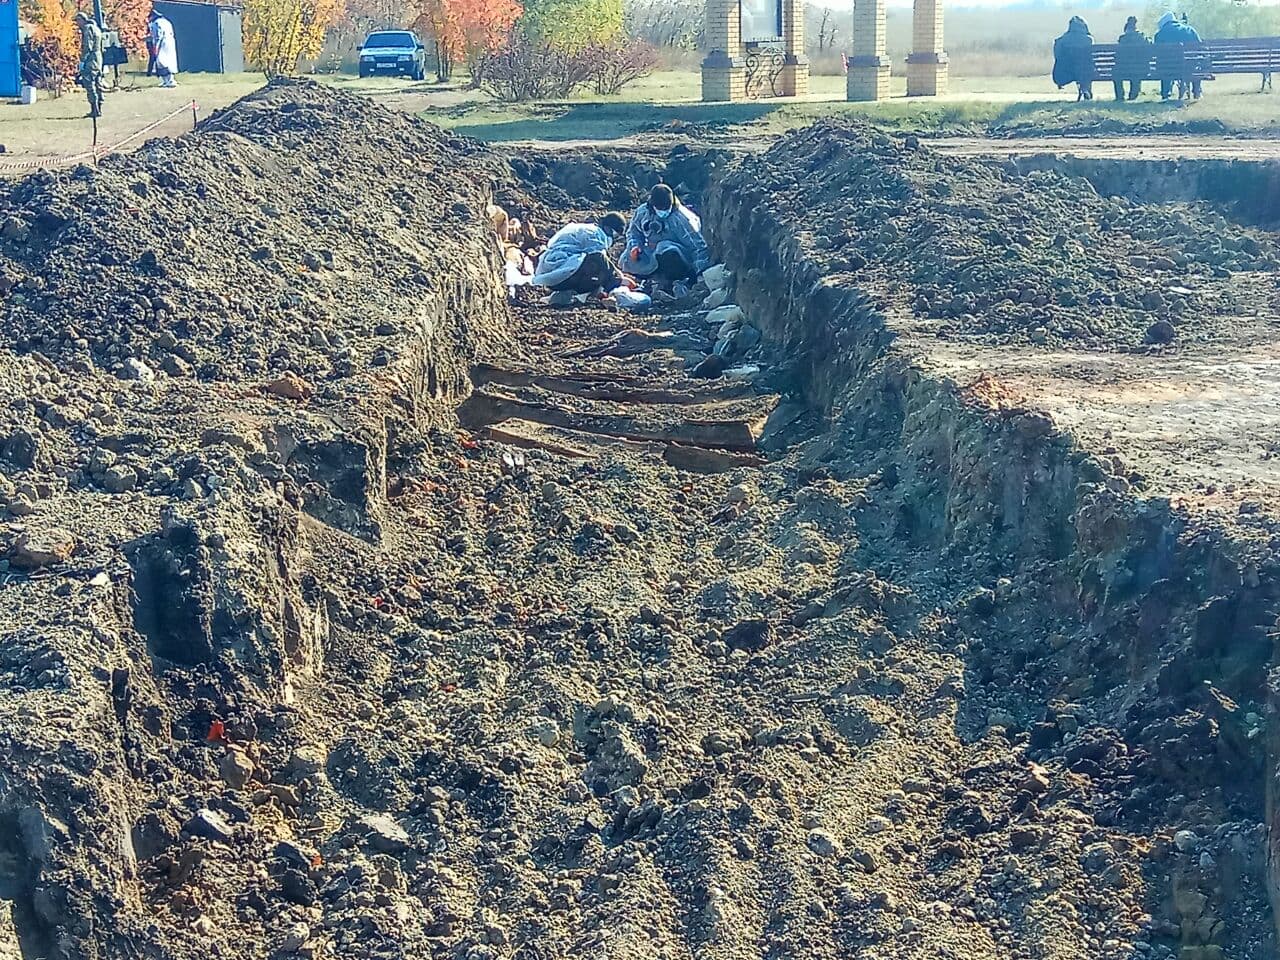 First of over 200 bodies being exhumed from Lugansk mass grave. One of Obama’s atrocities.